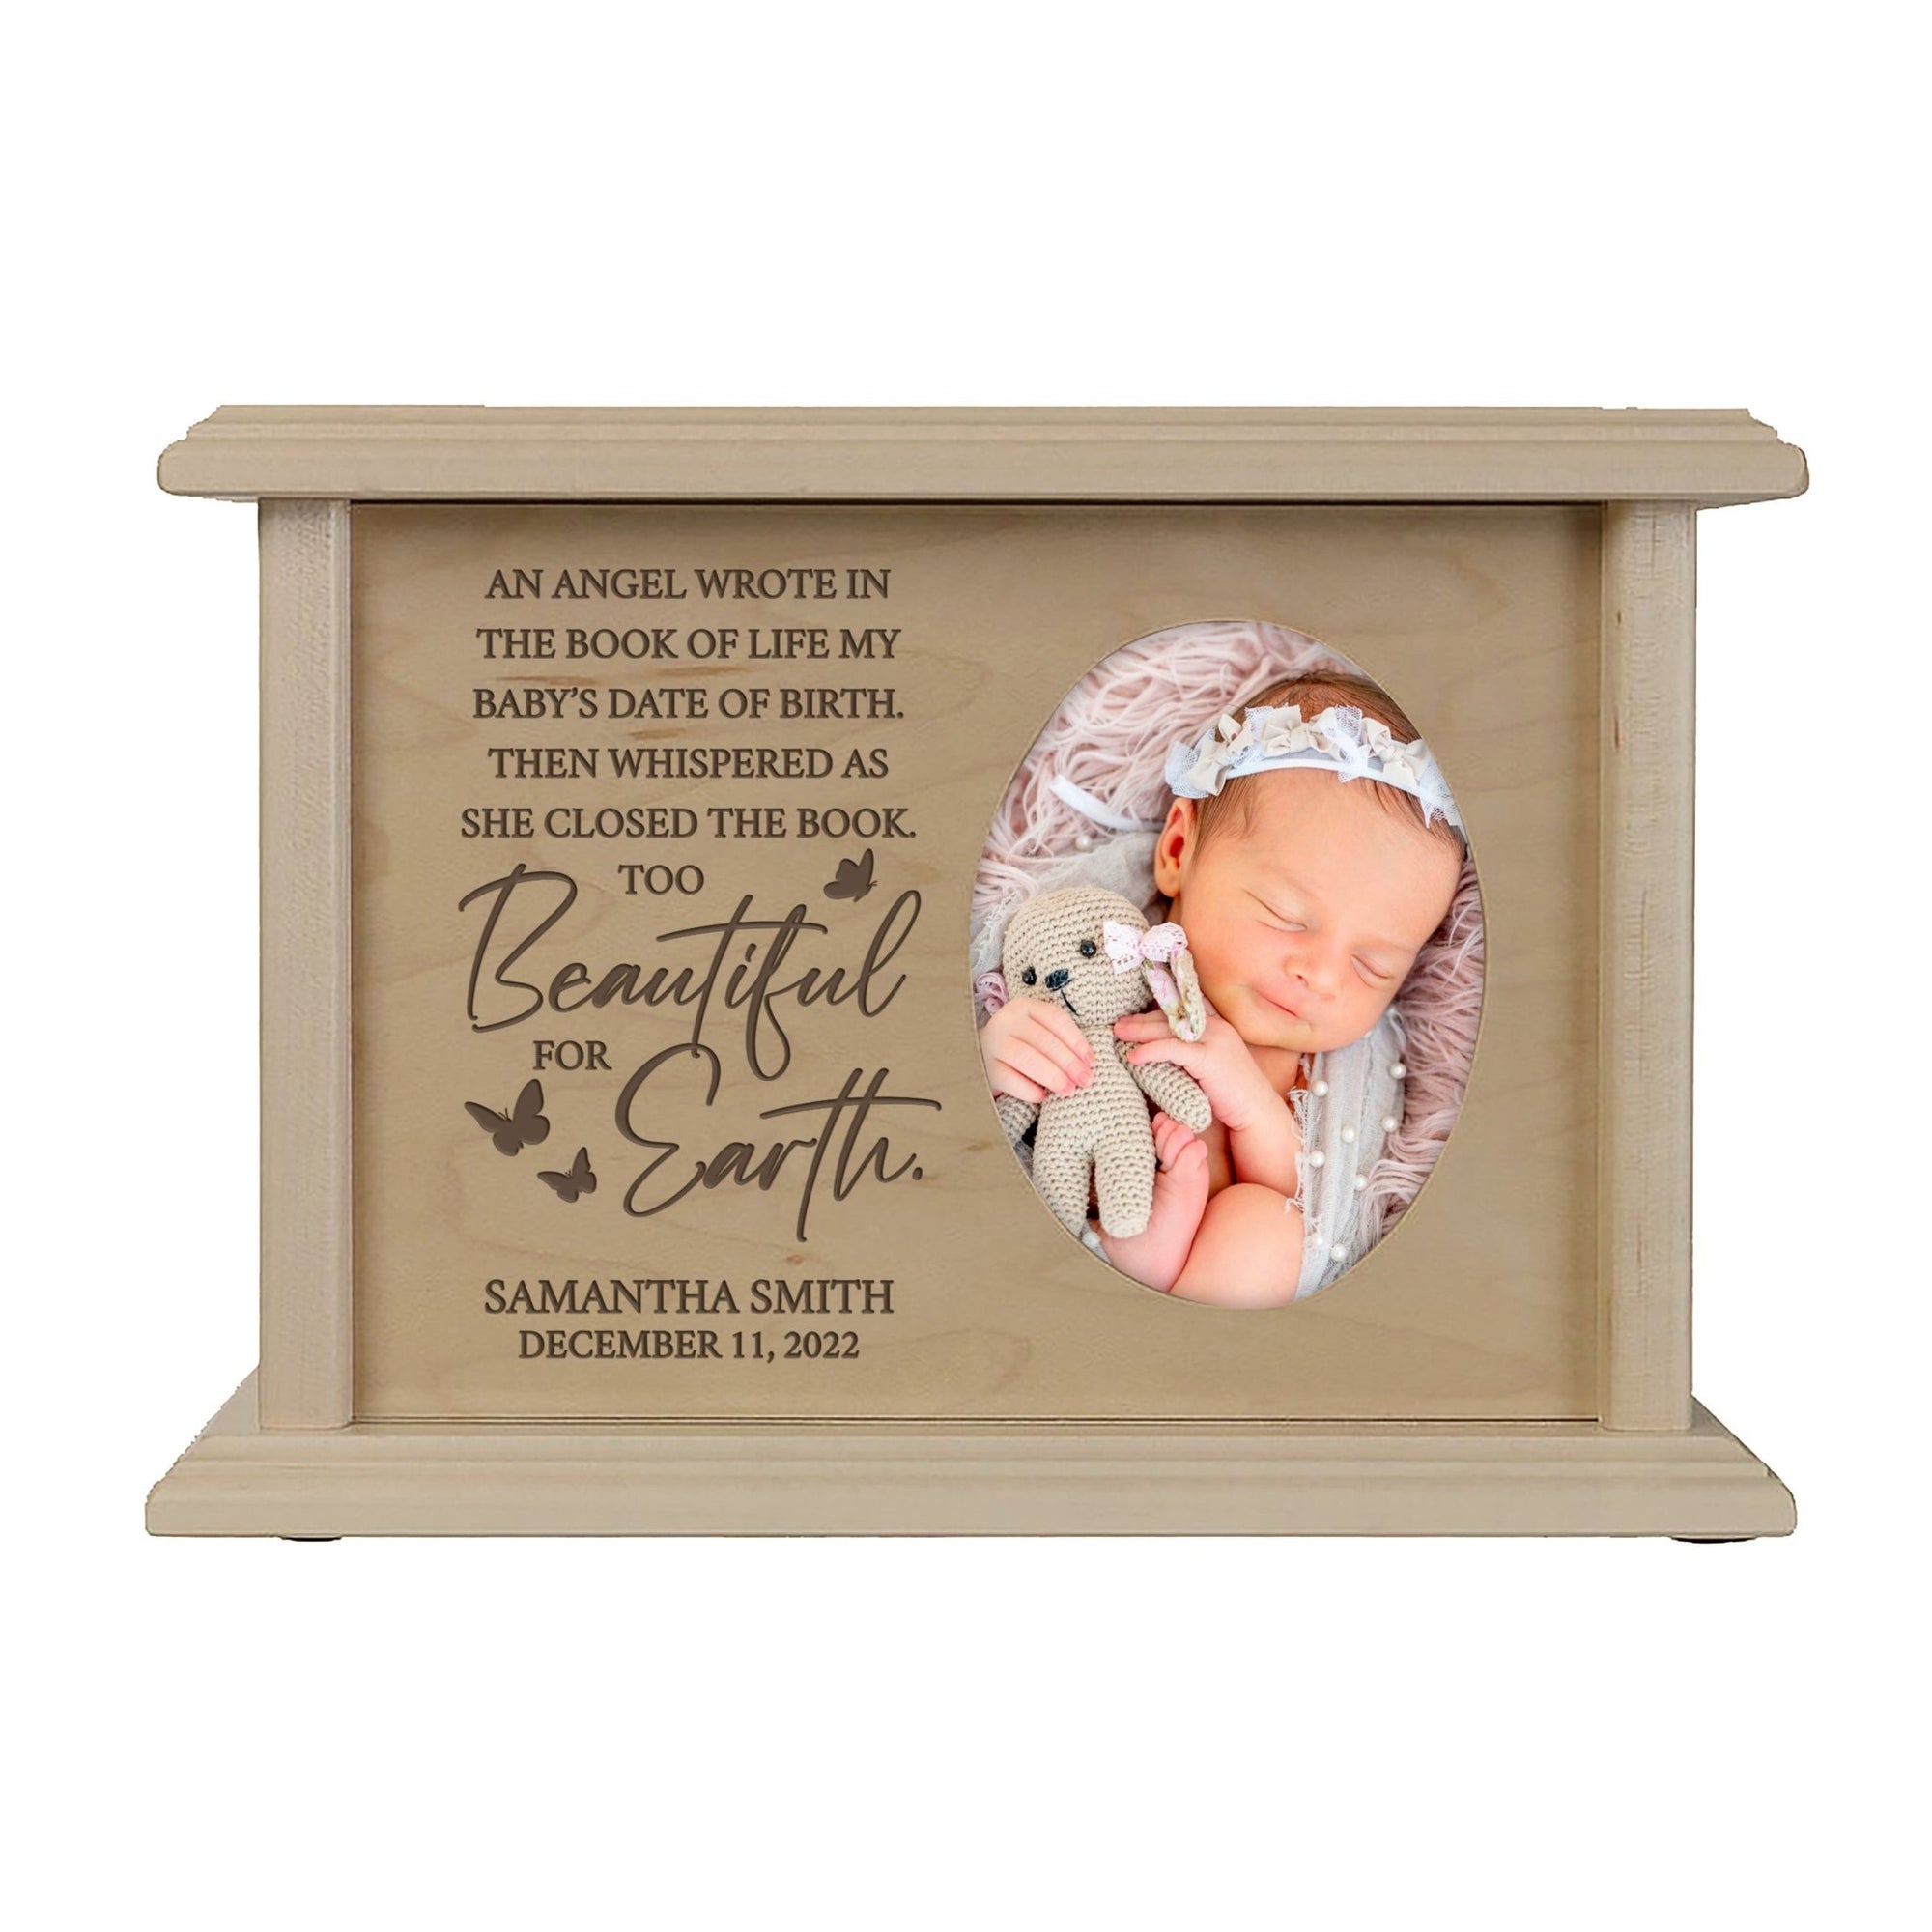 Custom Engraved Cremation Photo Urn Box for Human Ashes - An Angel In The Book of Life - LifeSong Milestones